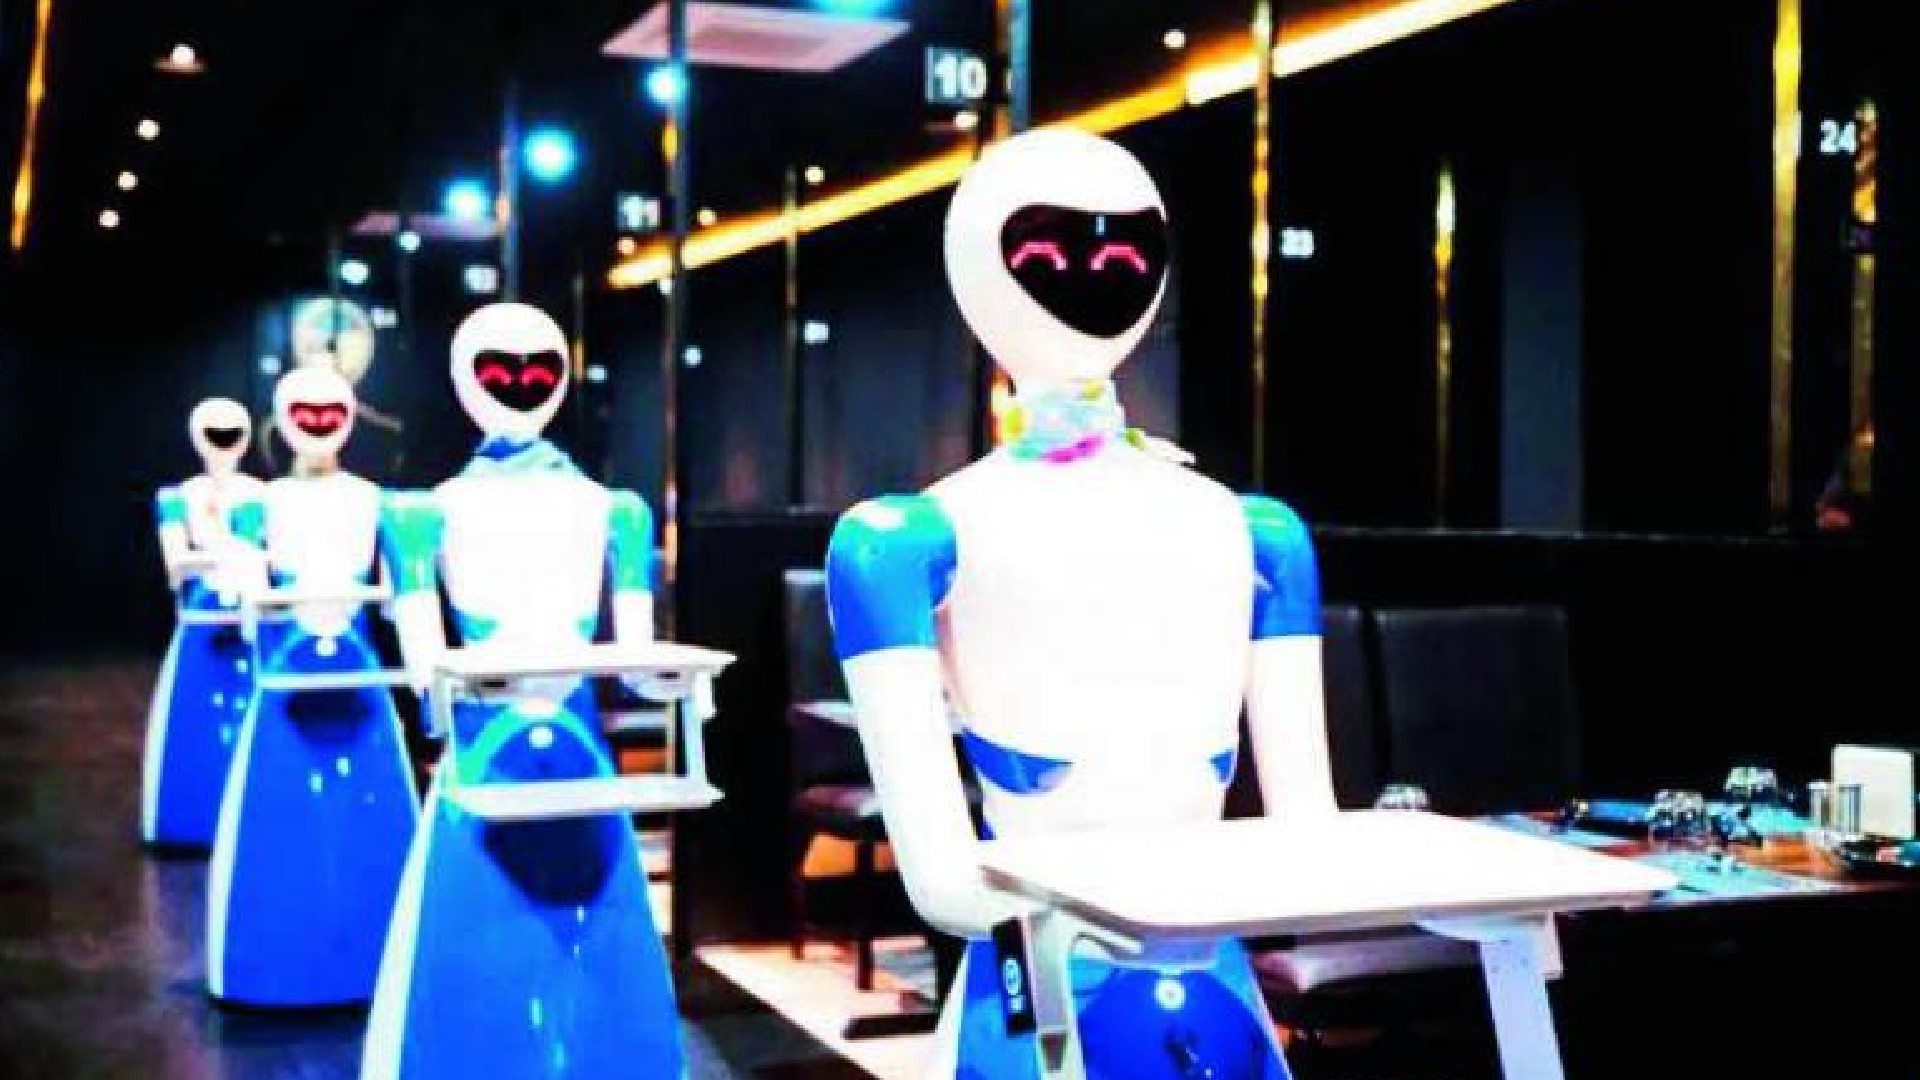 Restaurants Use Robots Instead Of People To Cook & Serve At Low Cost